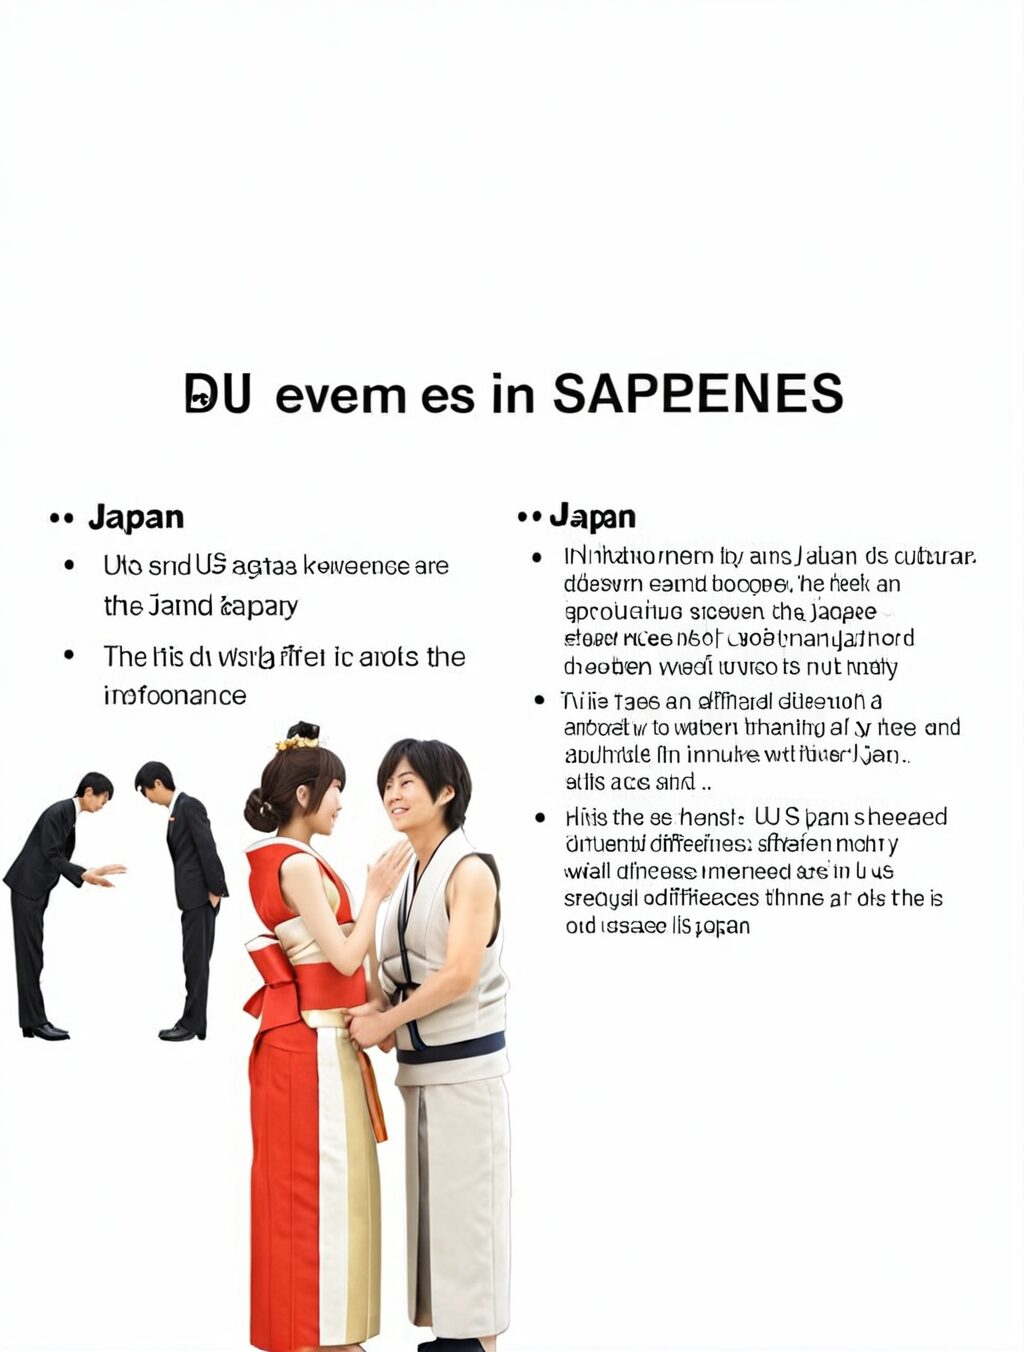 cultural differences between us and japan